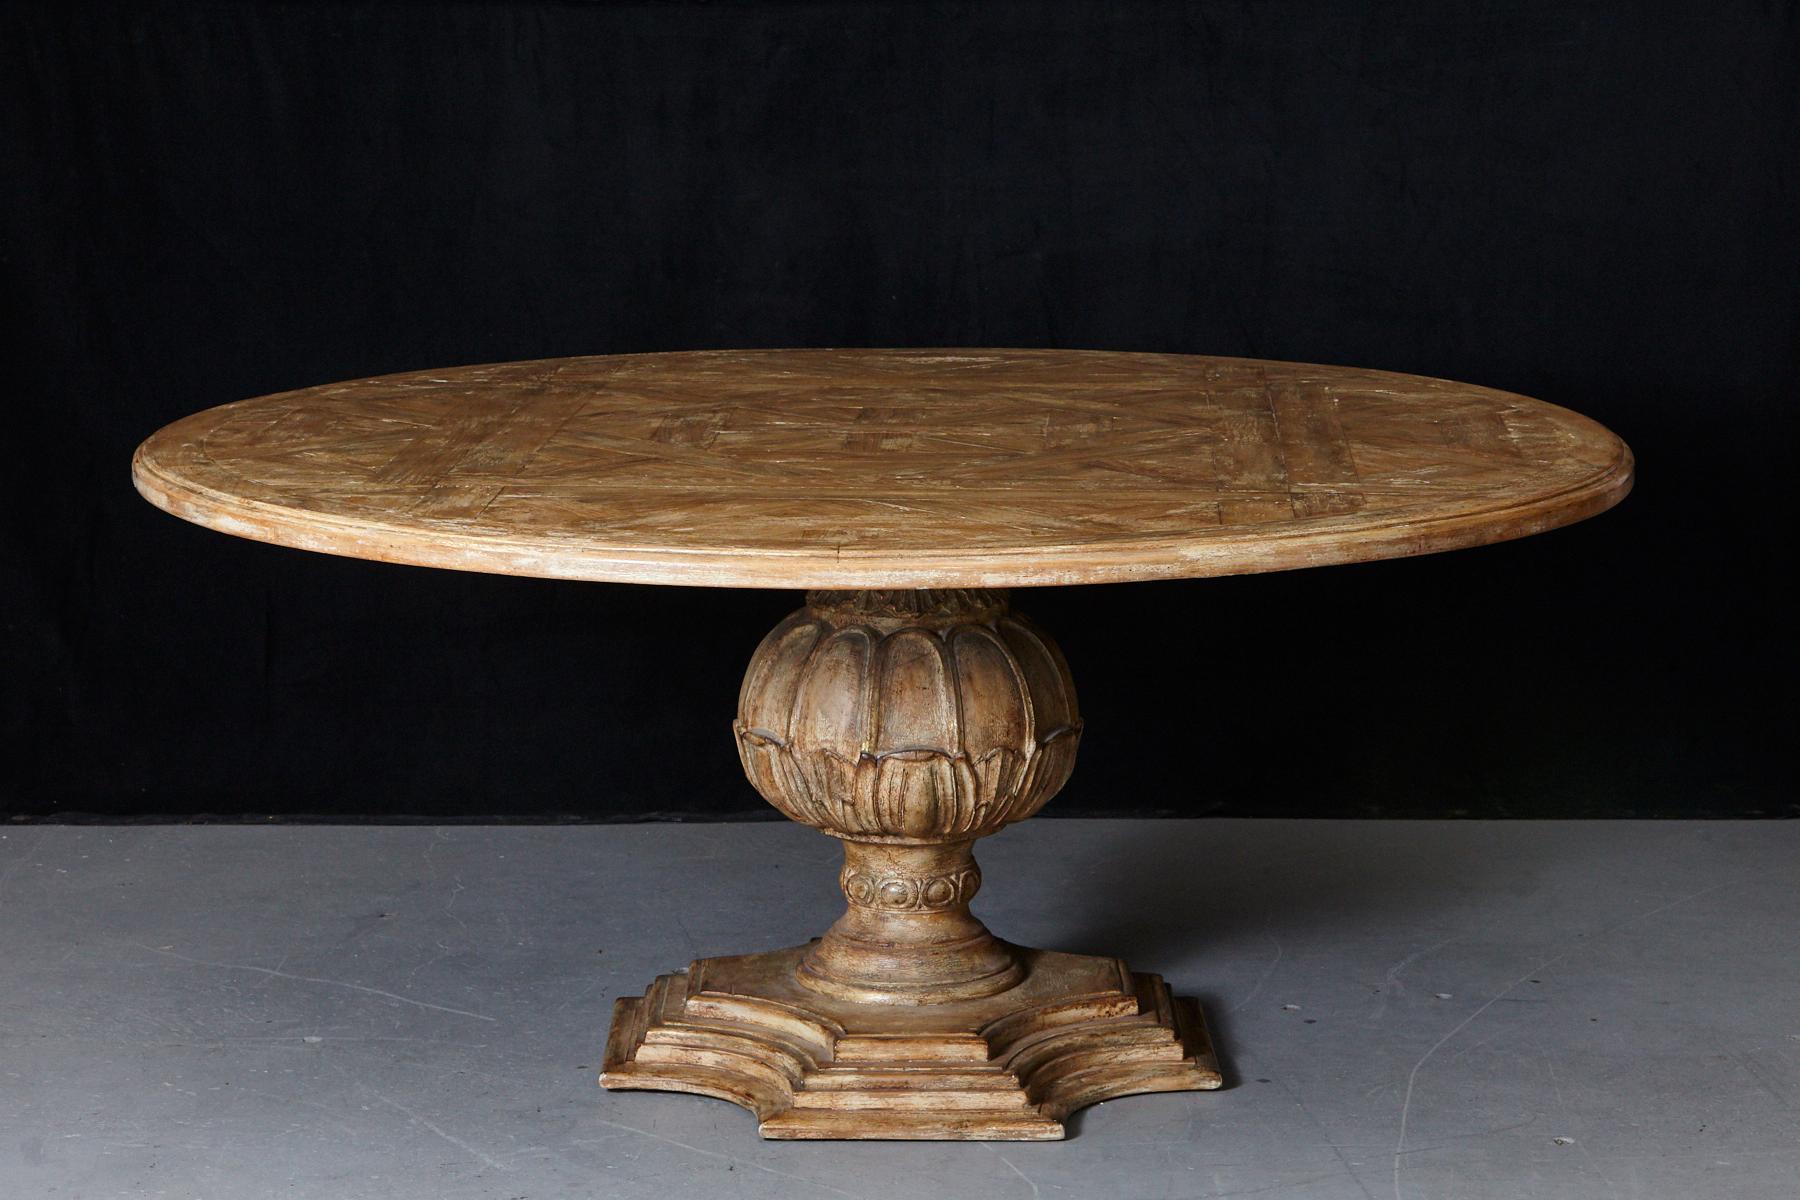 Large custom made and paint decorated round top baluster dining table with parquet top.
Voluntarily distressed look, some little paint loss to the top, please refer to the detailed photos.
A very solid table, can also be used as a centrepiece in